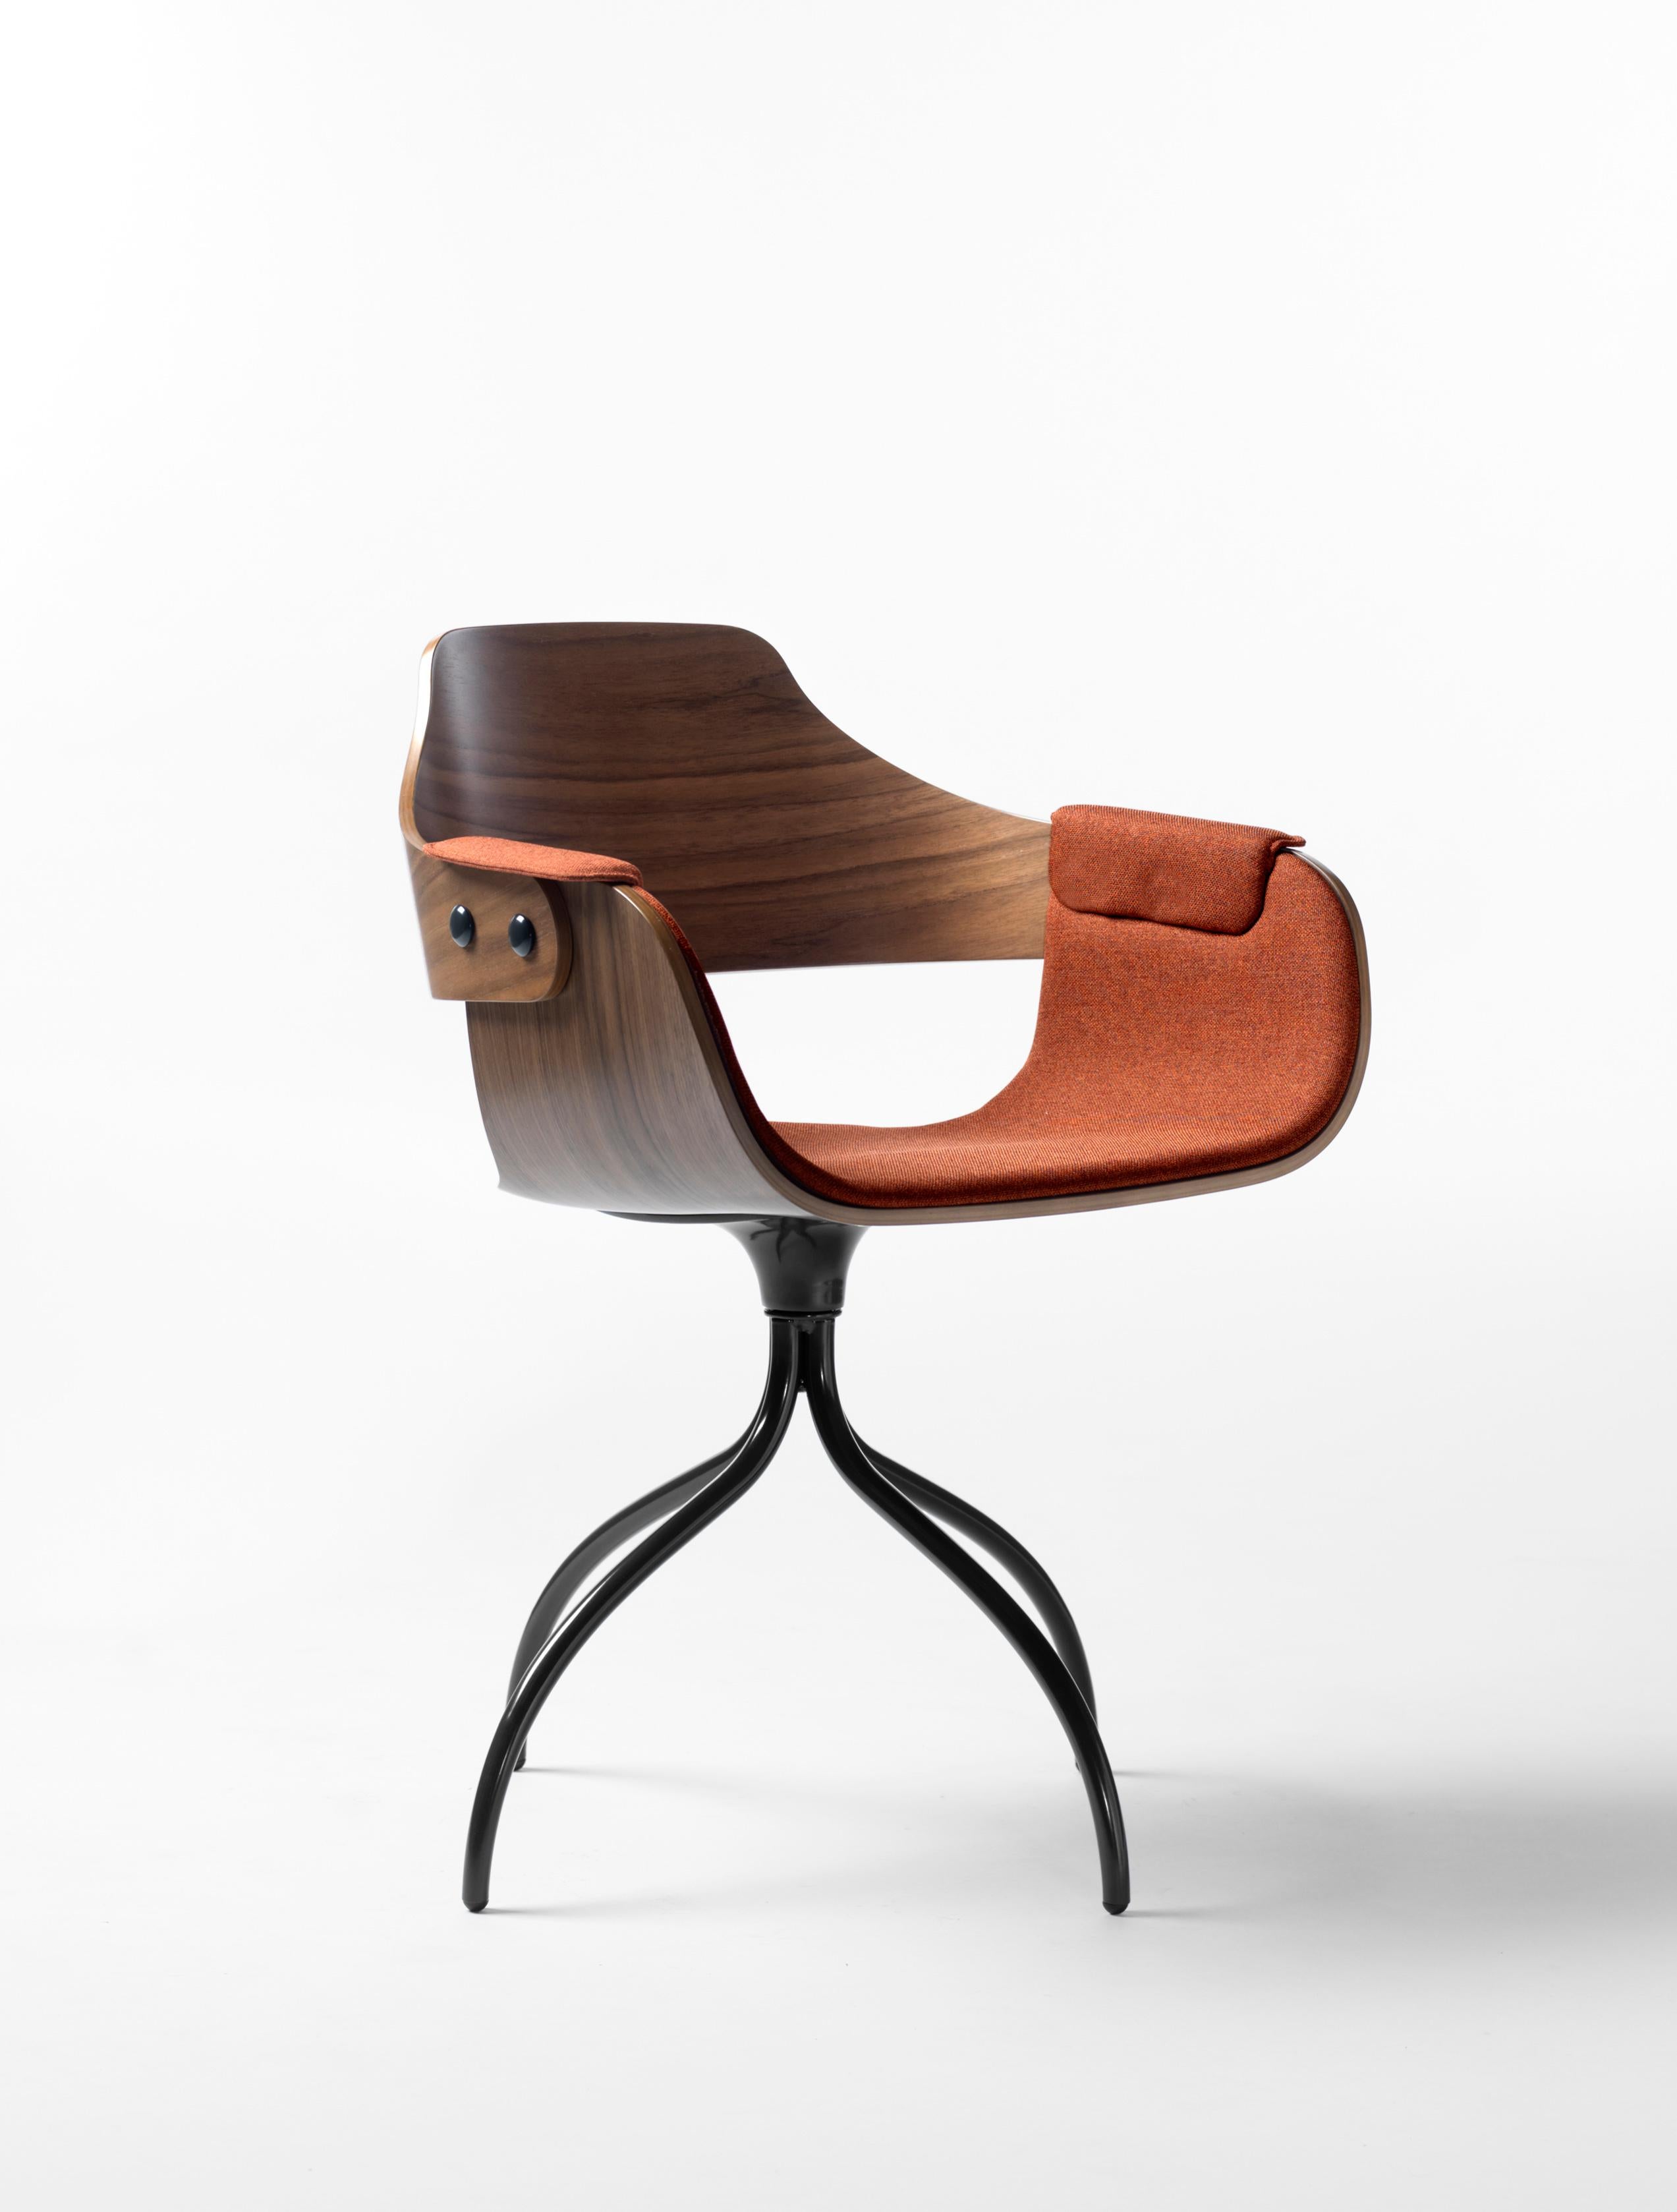 Modern Upholstered swivel chair in walnut designed by Jaime Hayon